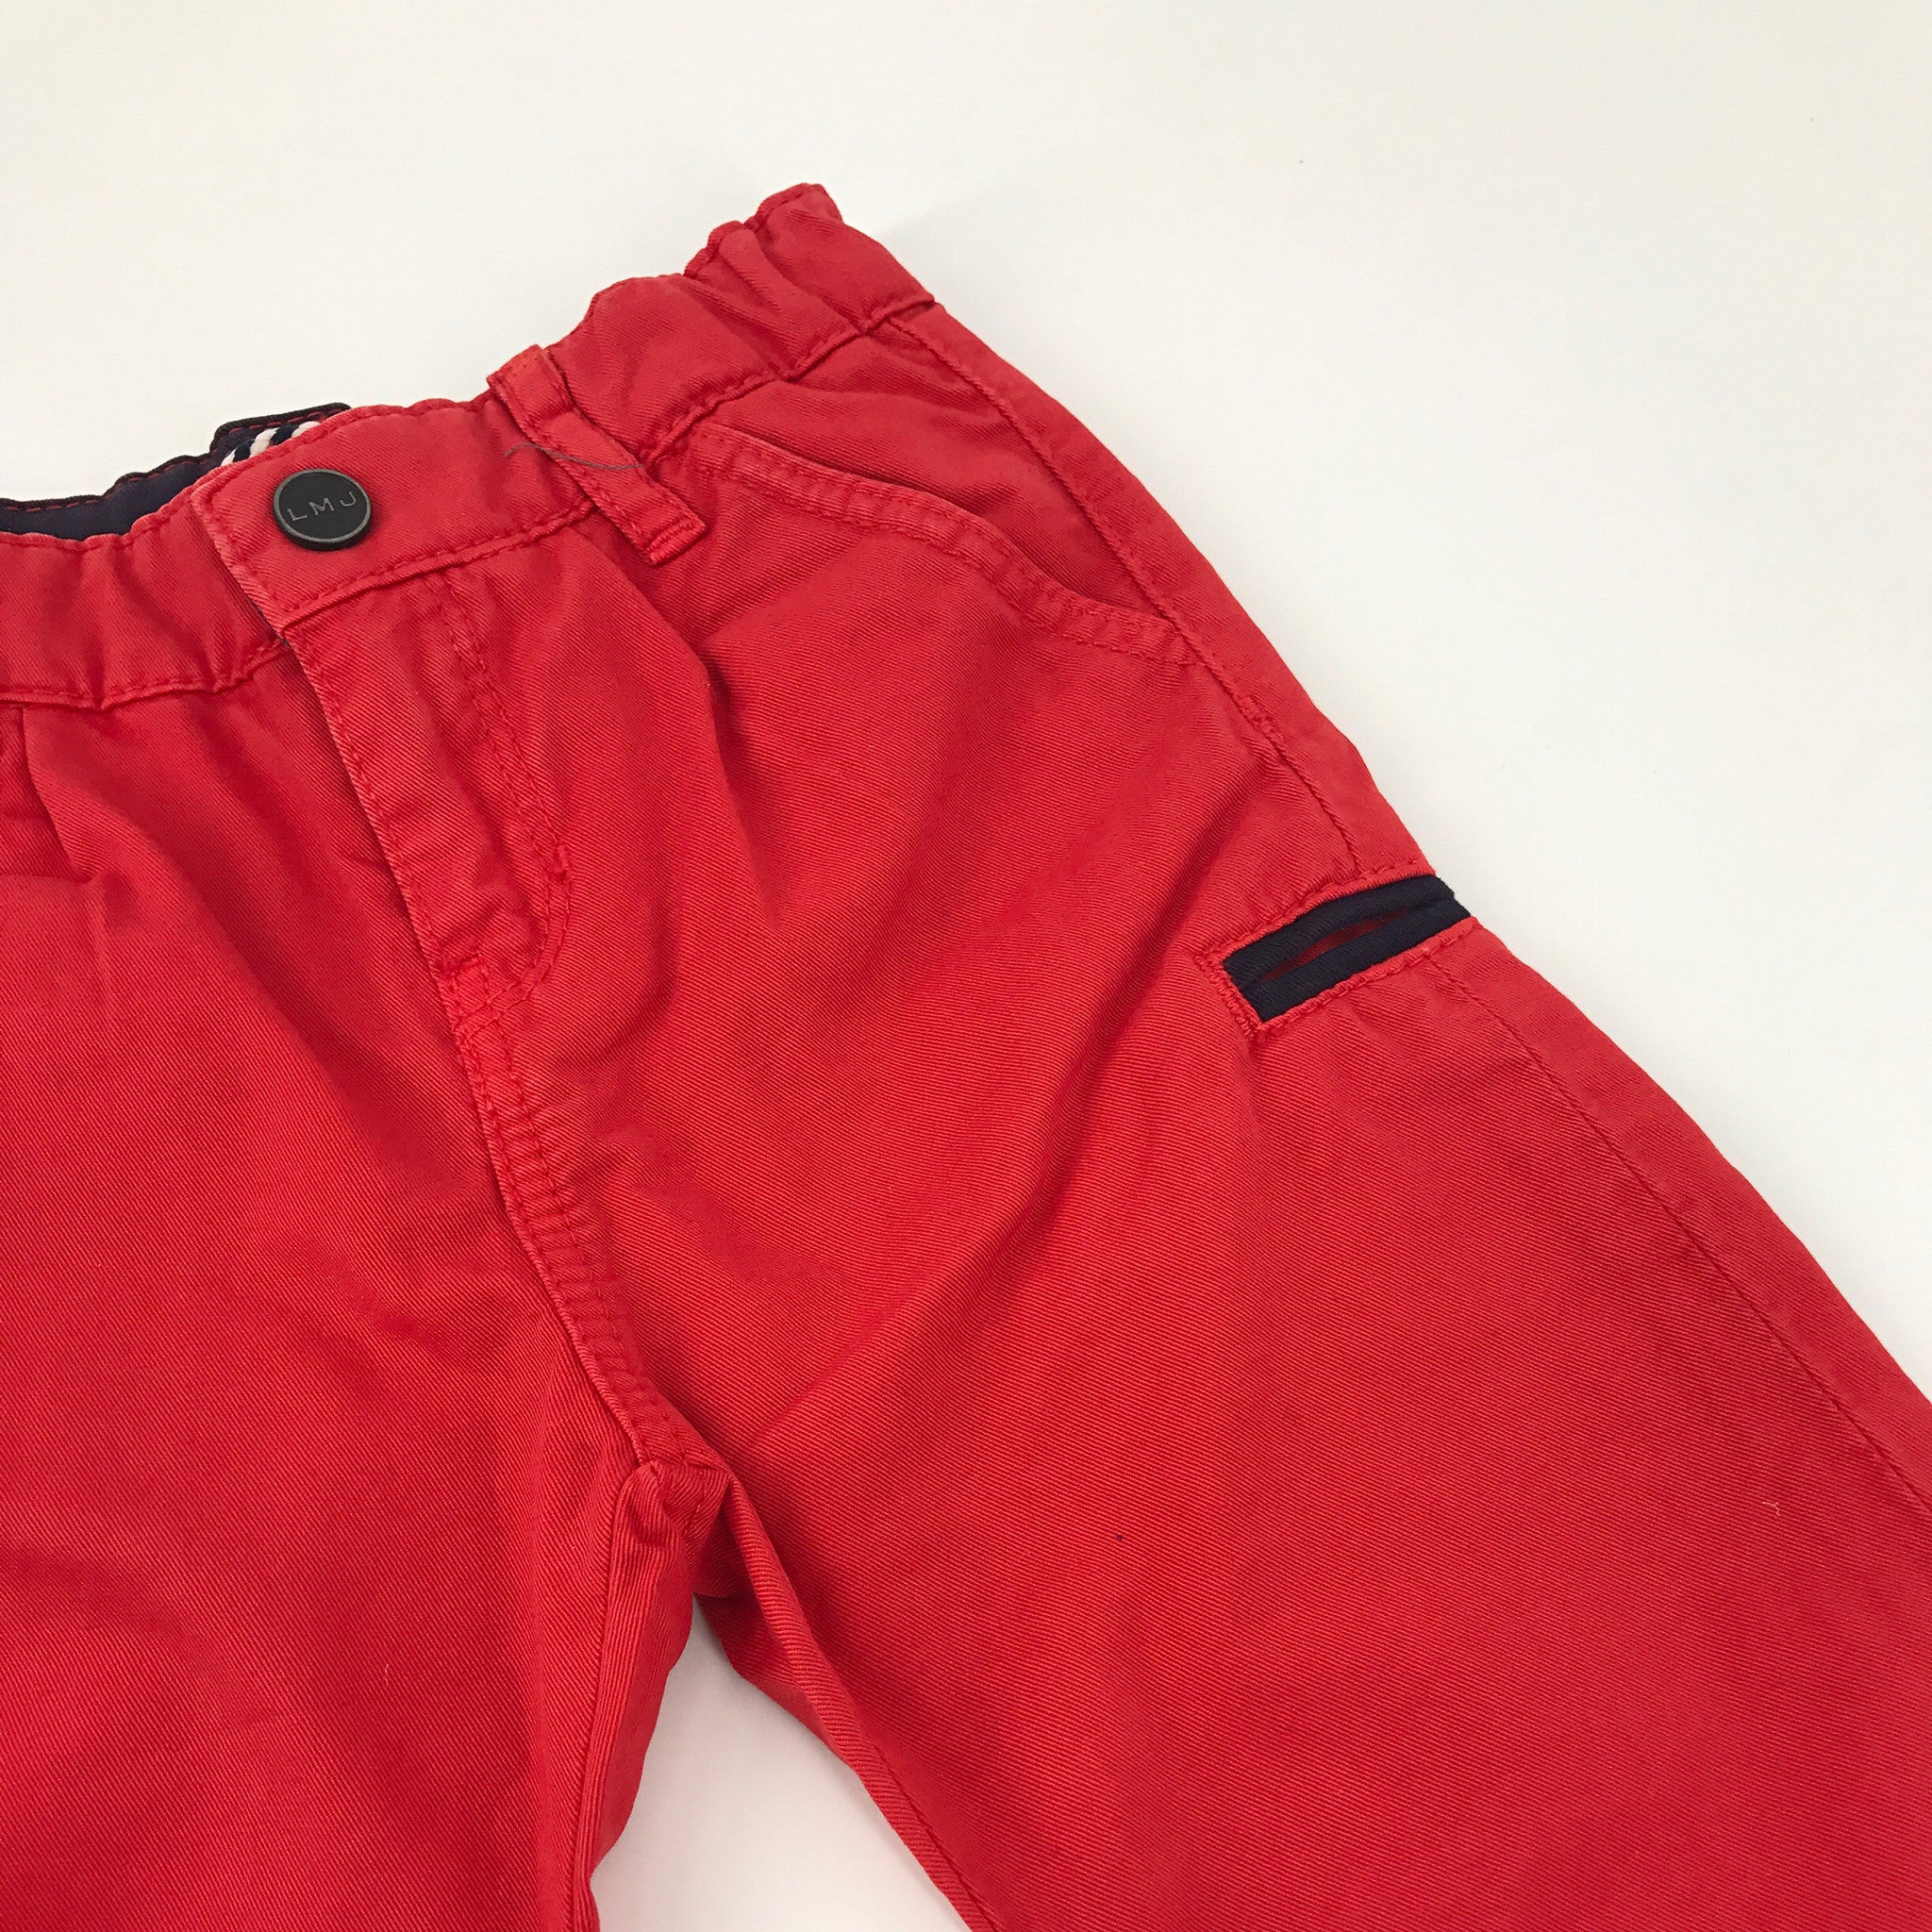 Baby Boys Red Chinos with Black Trim - CÉMAROSE | Children's Fashion Store - 3